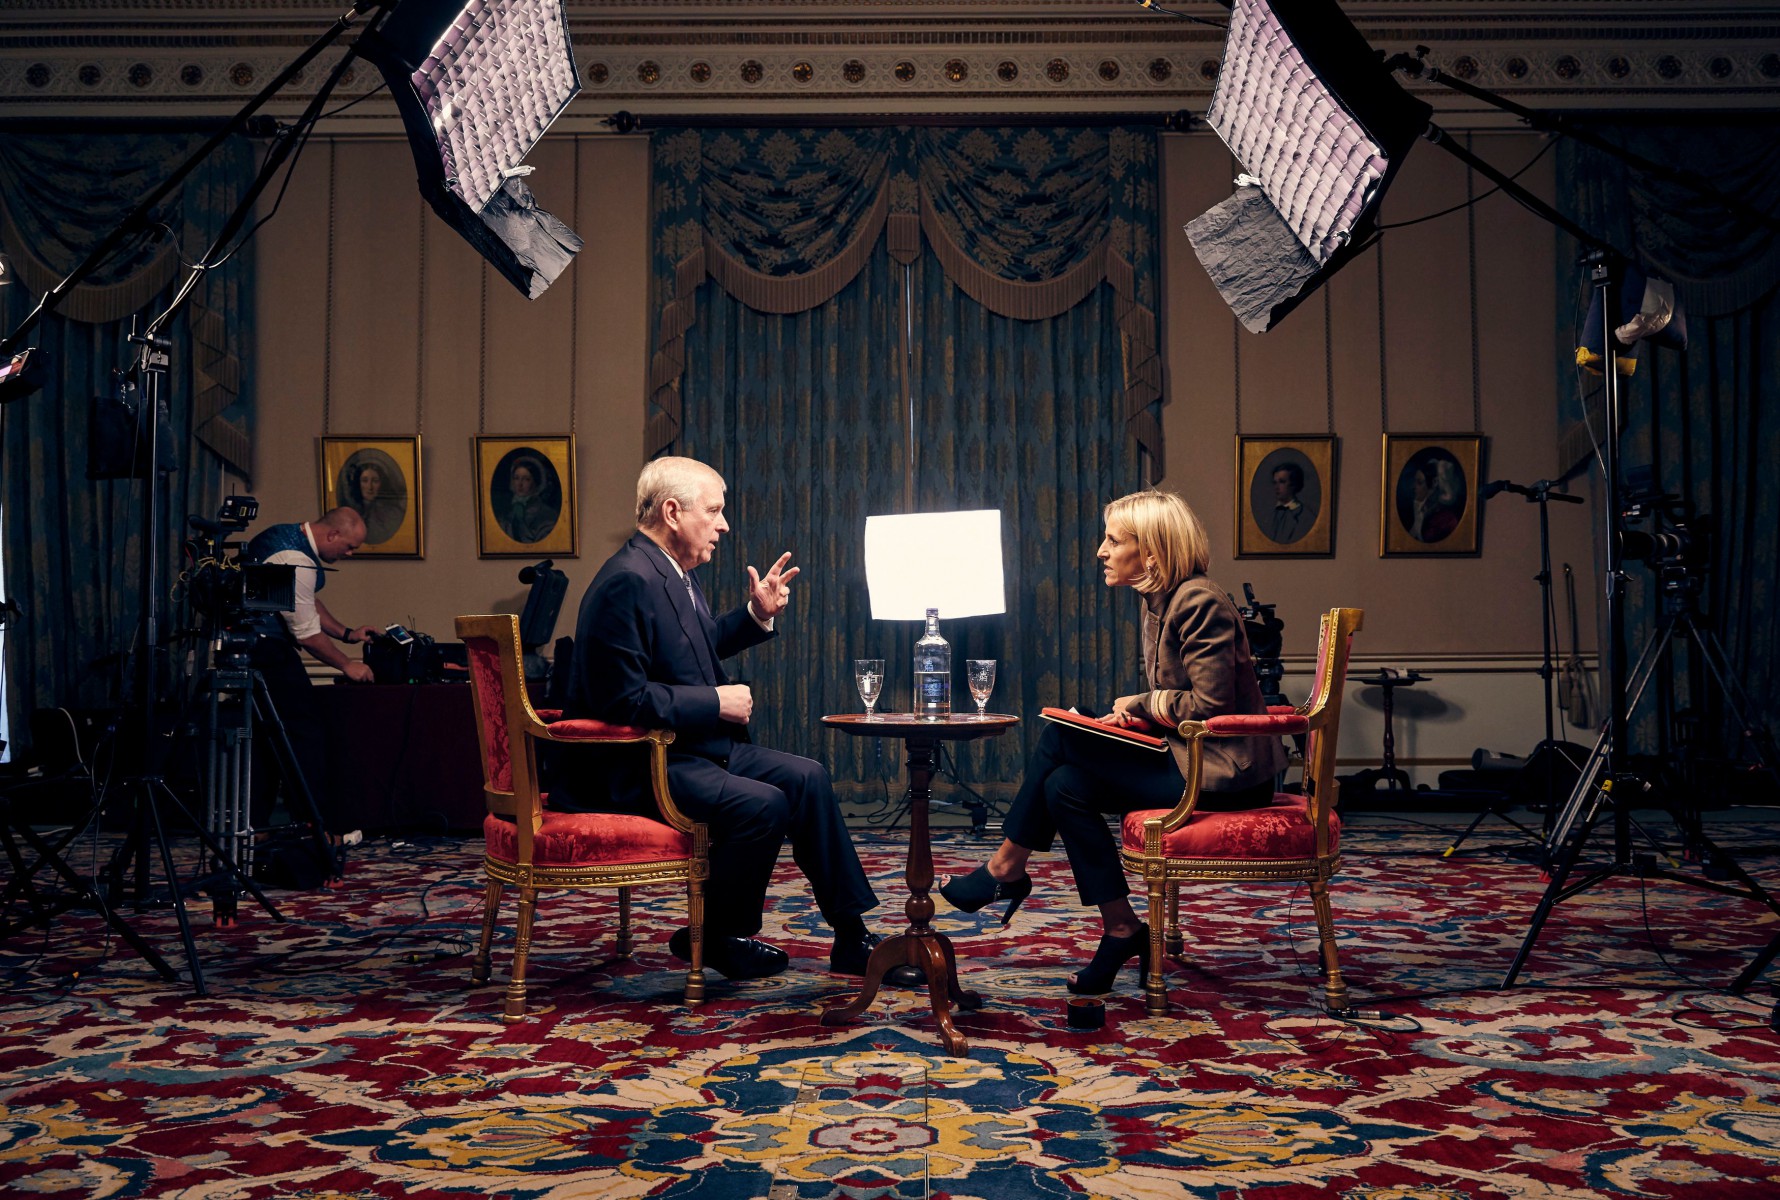 The interview will air on BBC Newsnight's Emily Maitlis